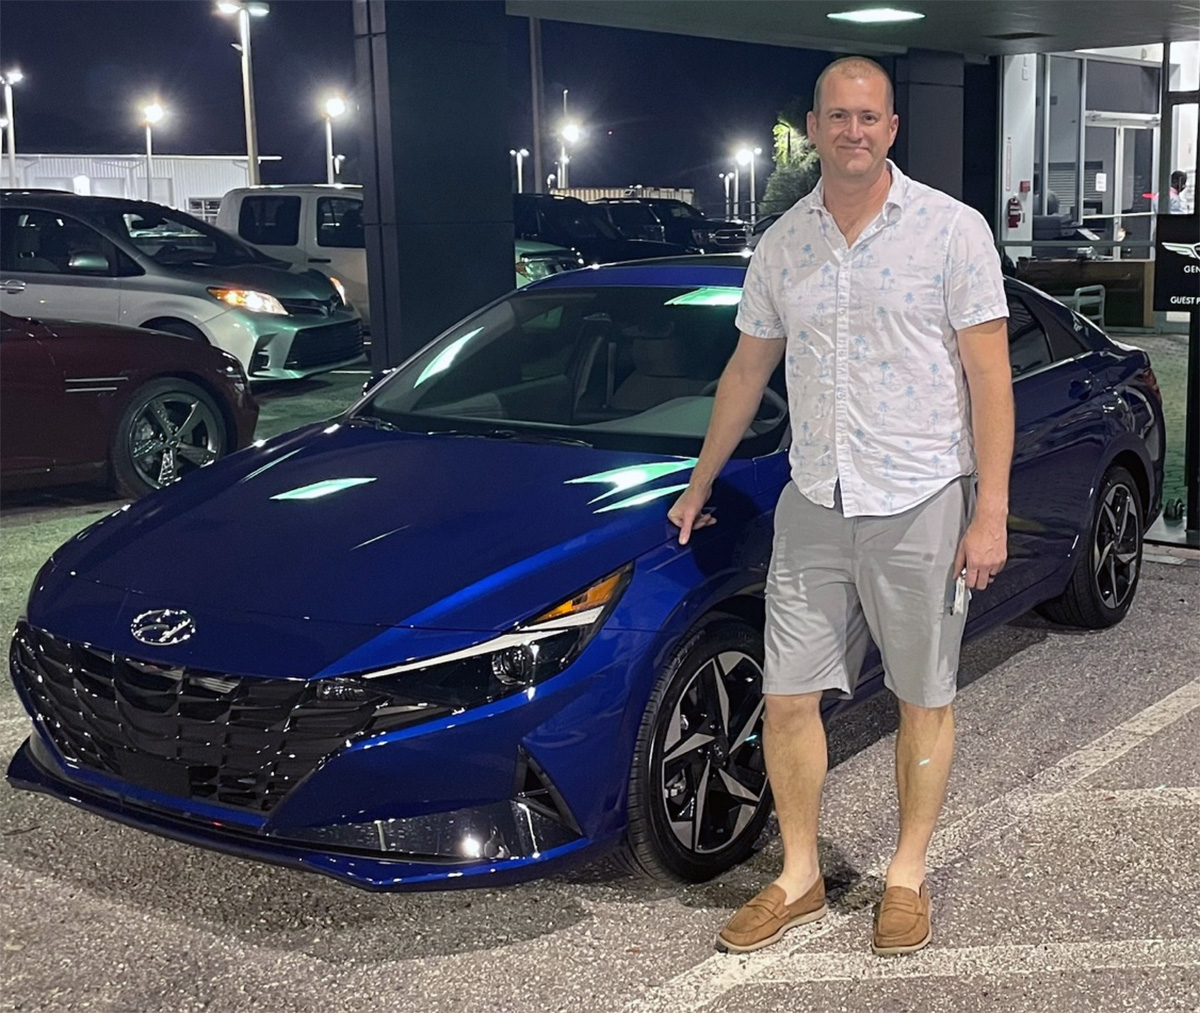 What are you looking for? Joel Nelson came to #LakelandHyundai for 'Fantastic support!!' & the 2022 #Elantra - #ThankYou Joel, that's what we do! #Congratulations on your purchase and if we can do anything, we're here for you! #GreatService #NewCar #GreatDeal #FantasticSupport